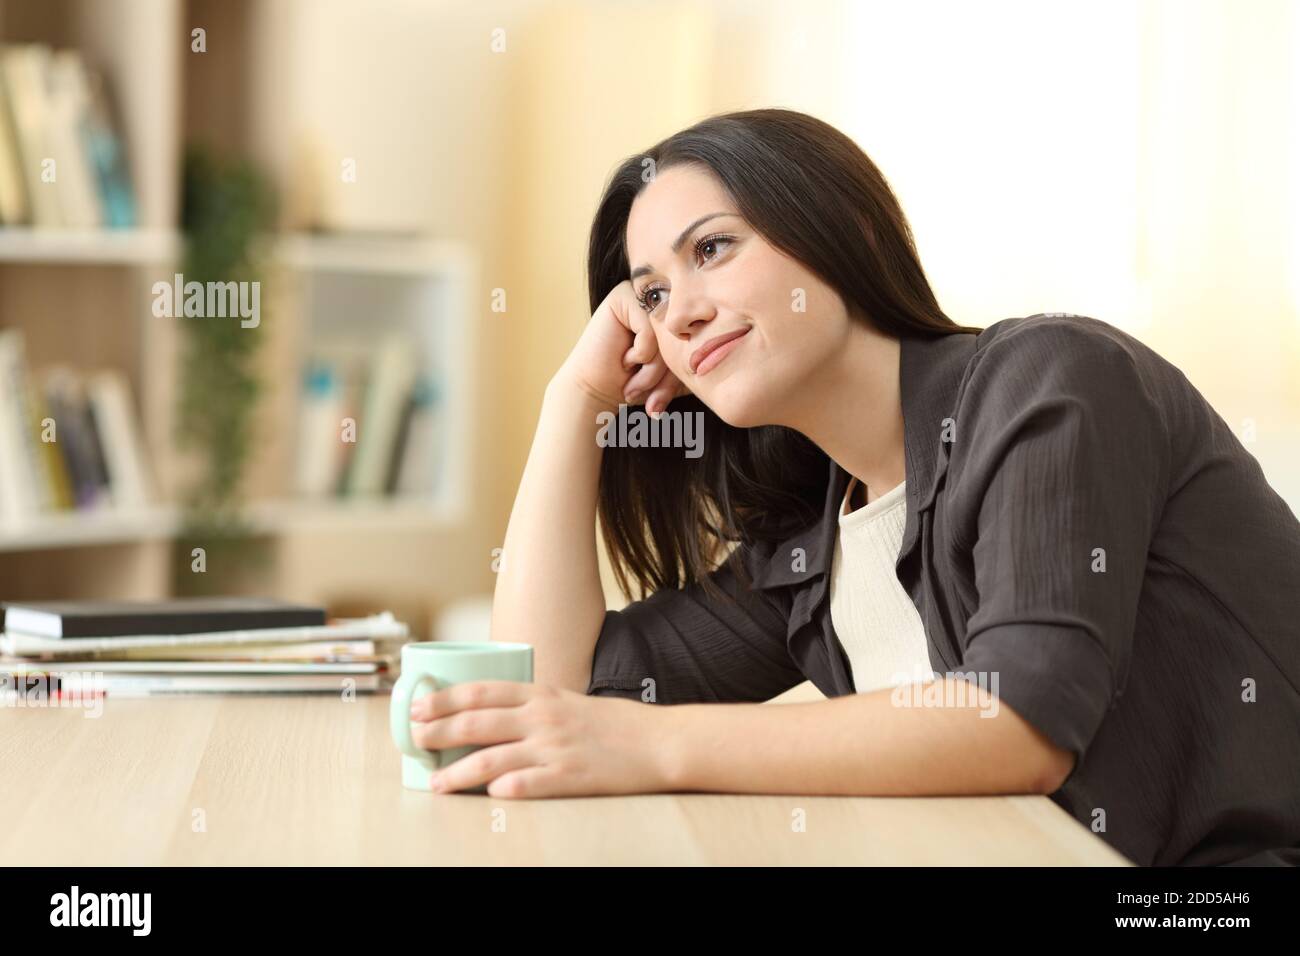 Pensive woman drinking coffee and thinking on a dek in the living room at home Stock Photo